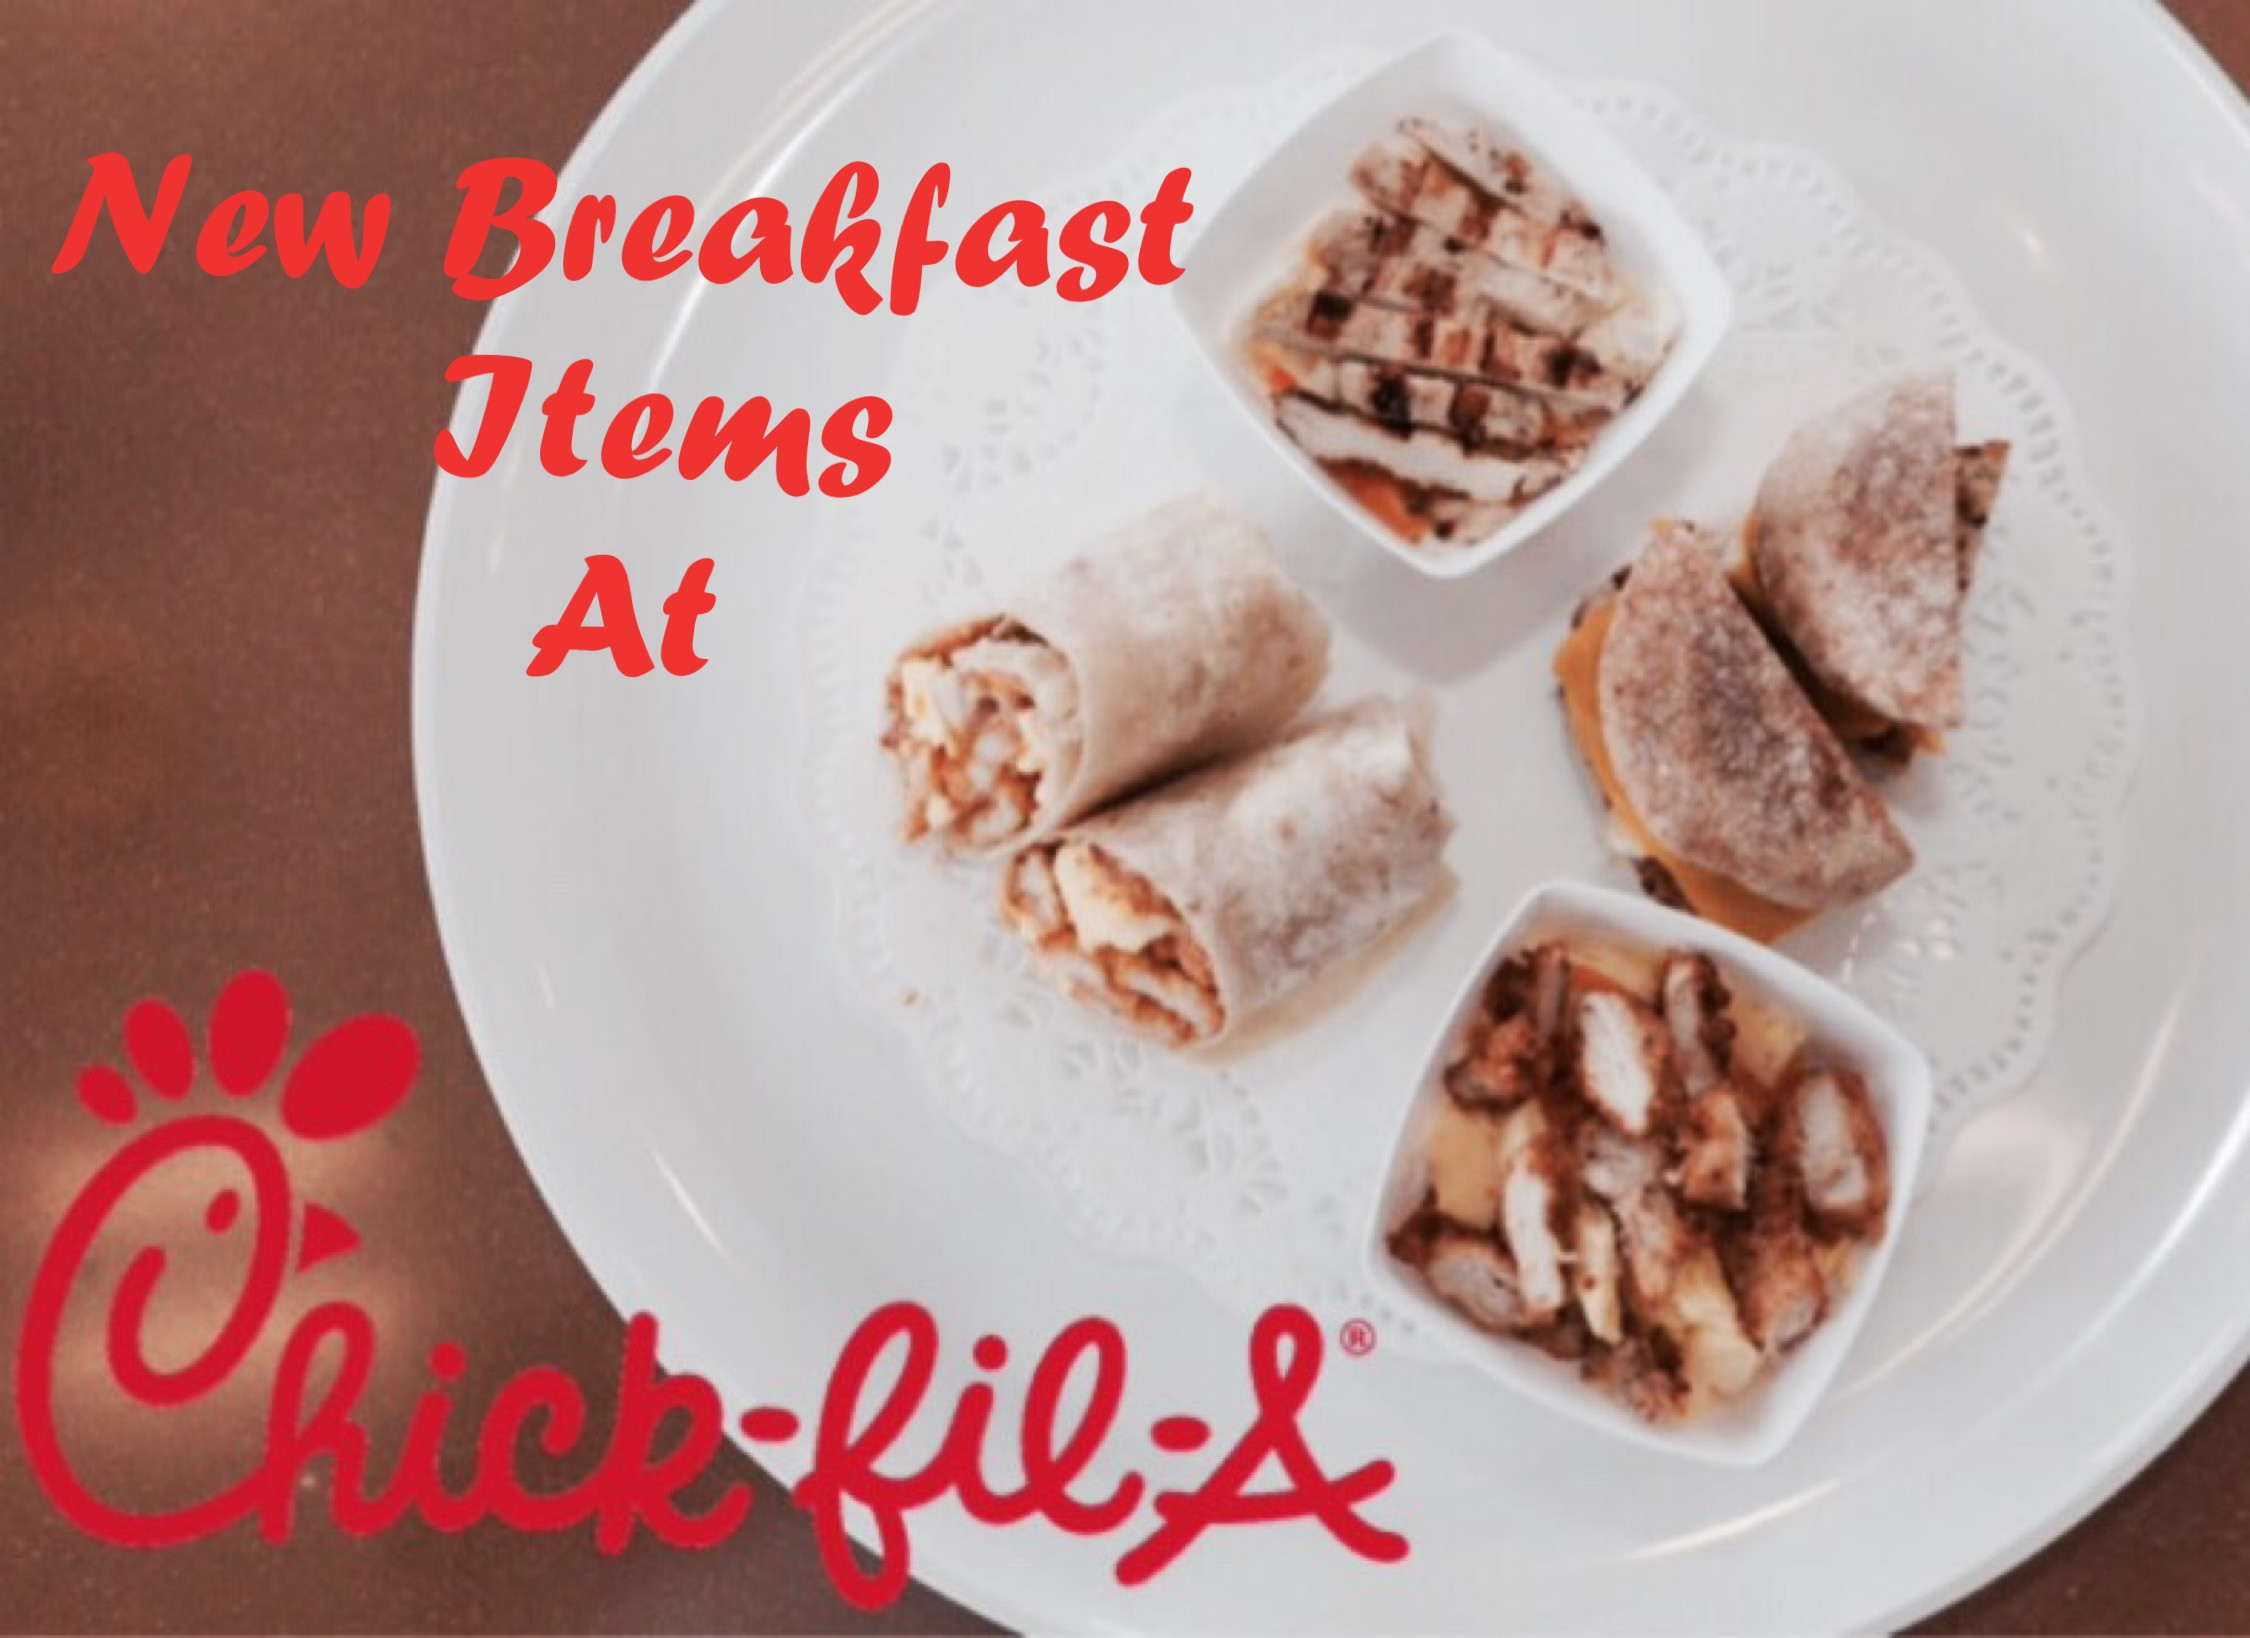 Healthy Chick Fil A Breakfast
 New Breakfast Items At Chick fil A Mom the Magnificent